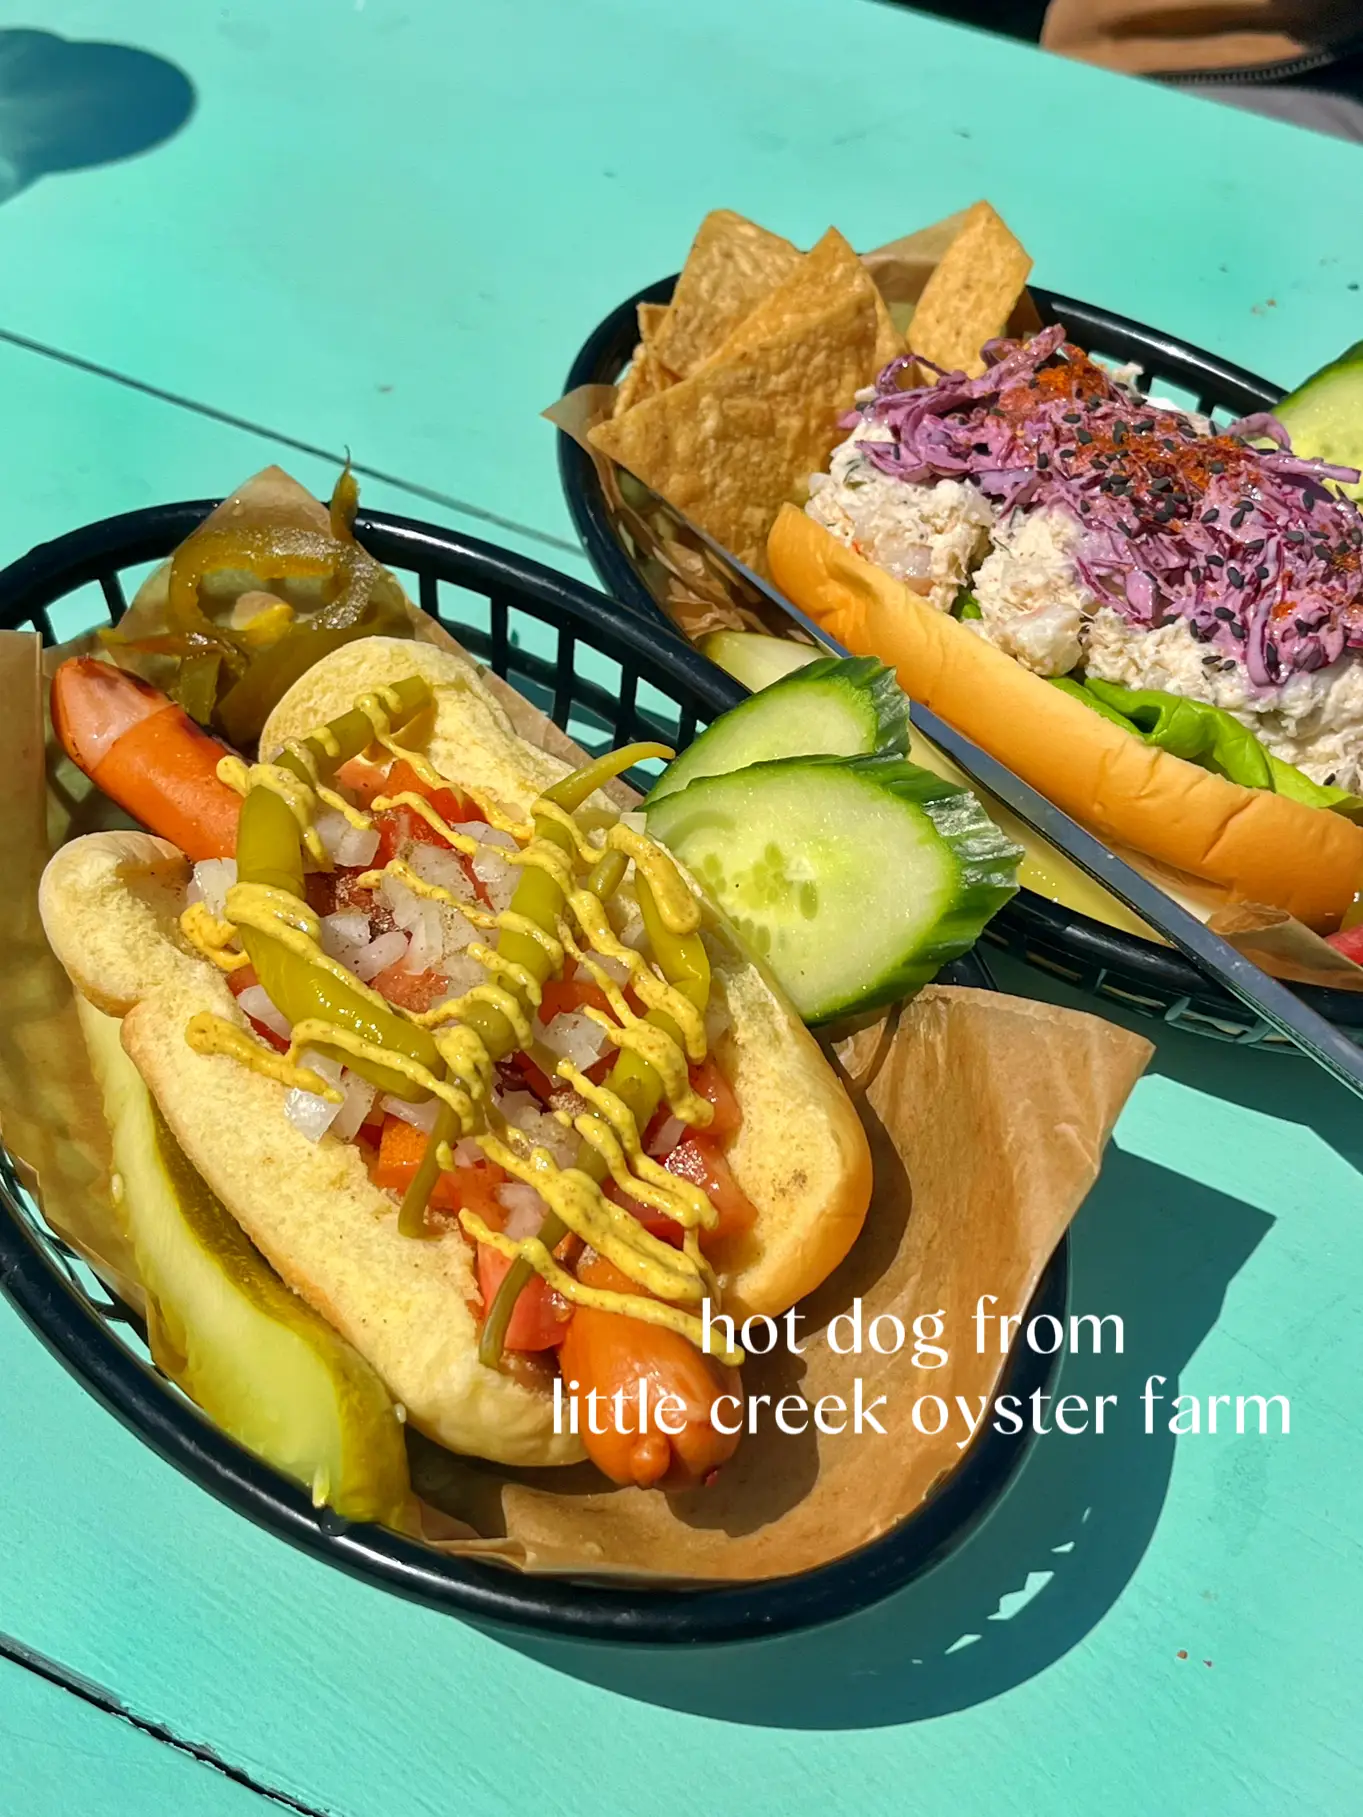  Two plates of food with the words "hot dog from little creek oyster farm" written on them.